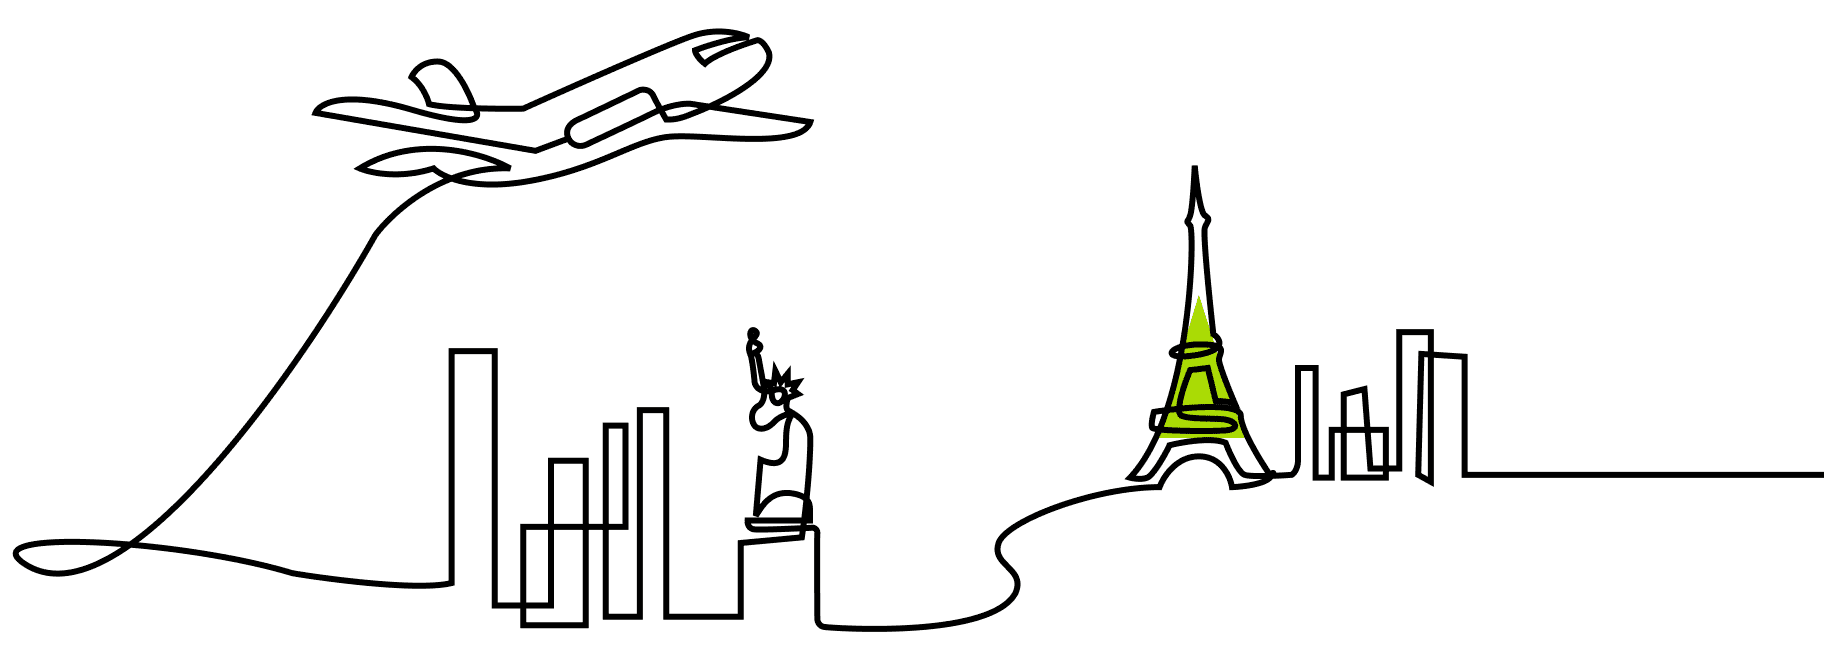 An illustration of a jet flying over New York City and Paris using a single contiguous line